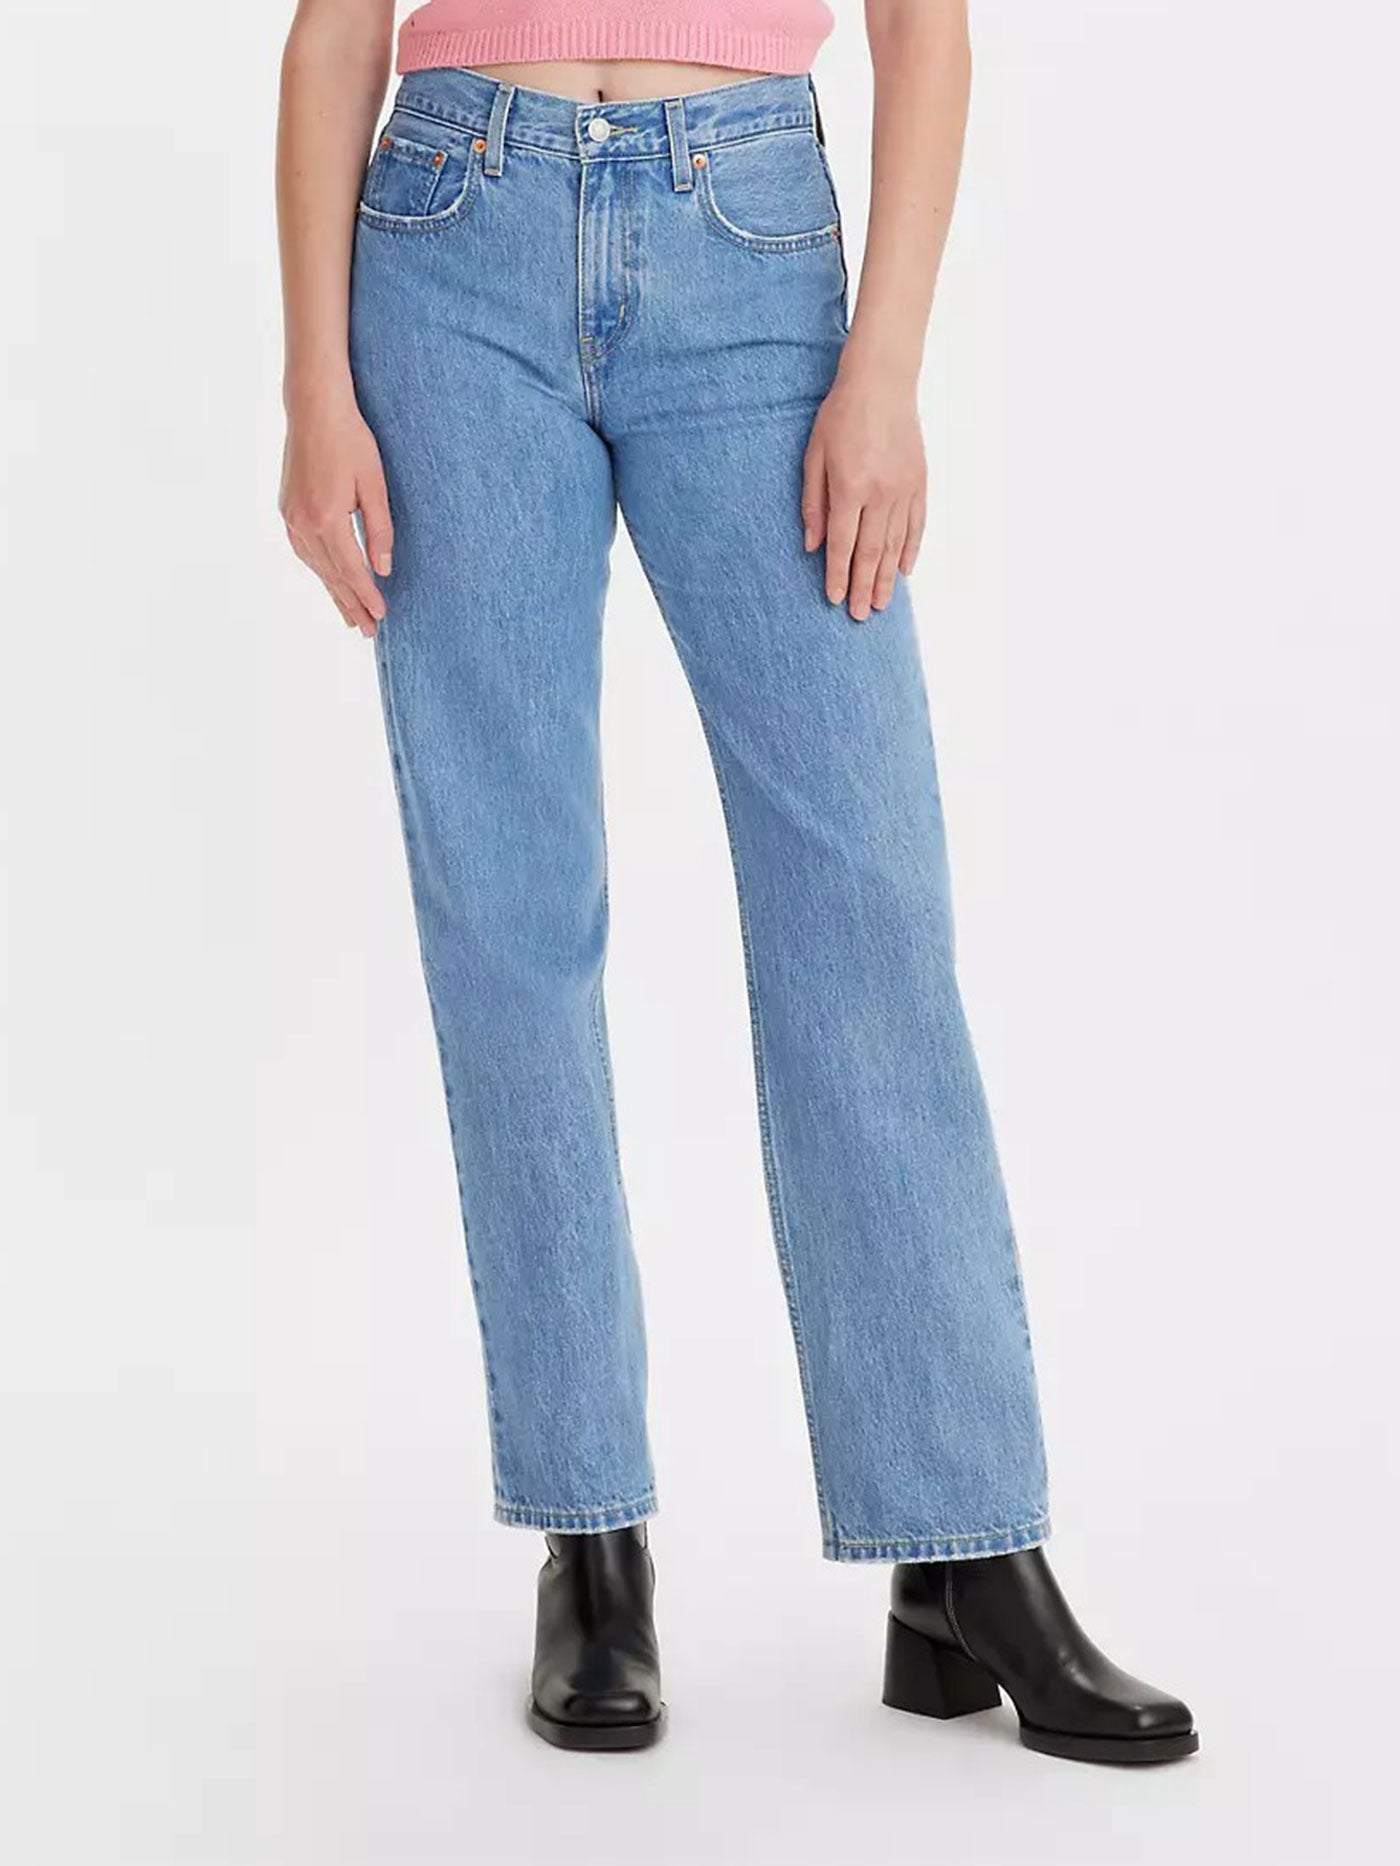 Levis Fall 2022 Low Pro Charlie Try Jeans | EMPIRE